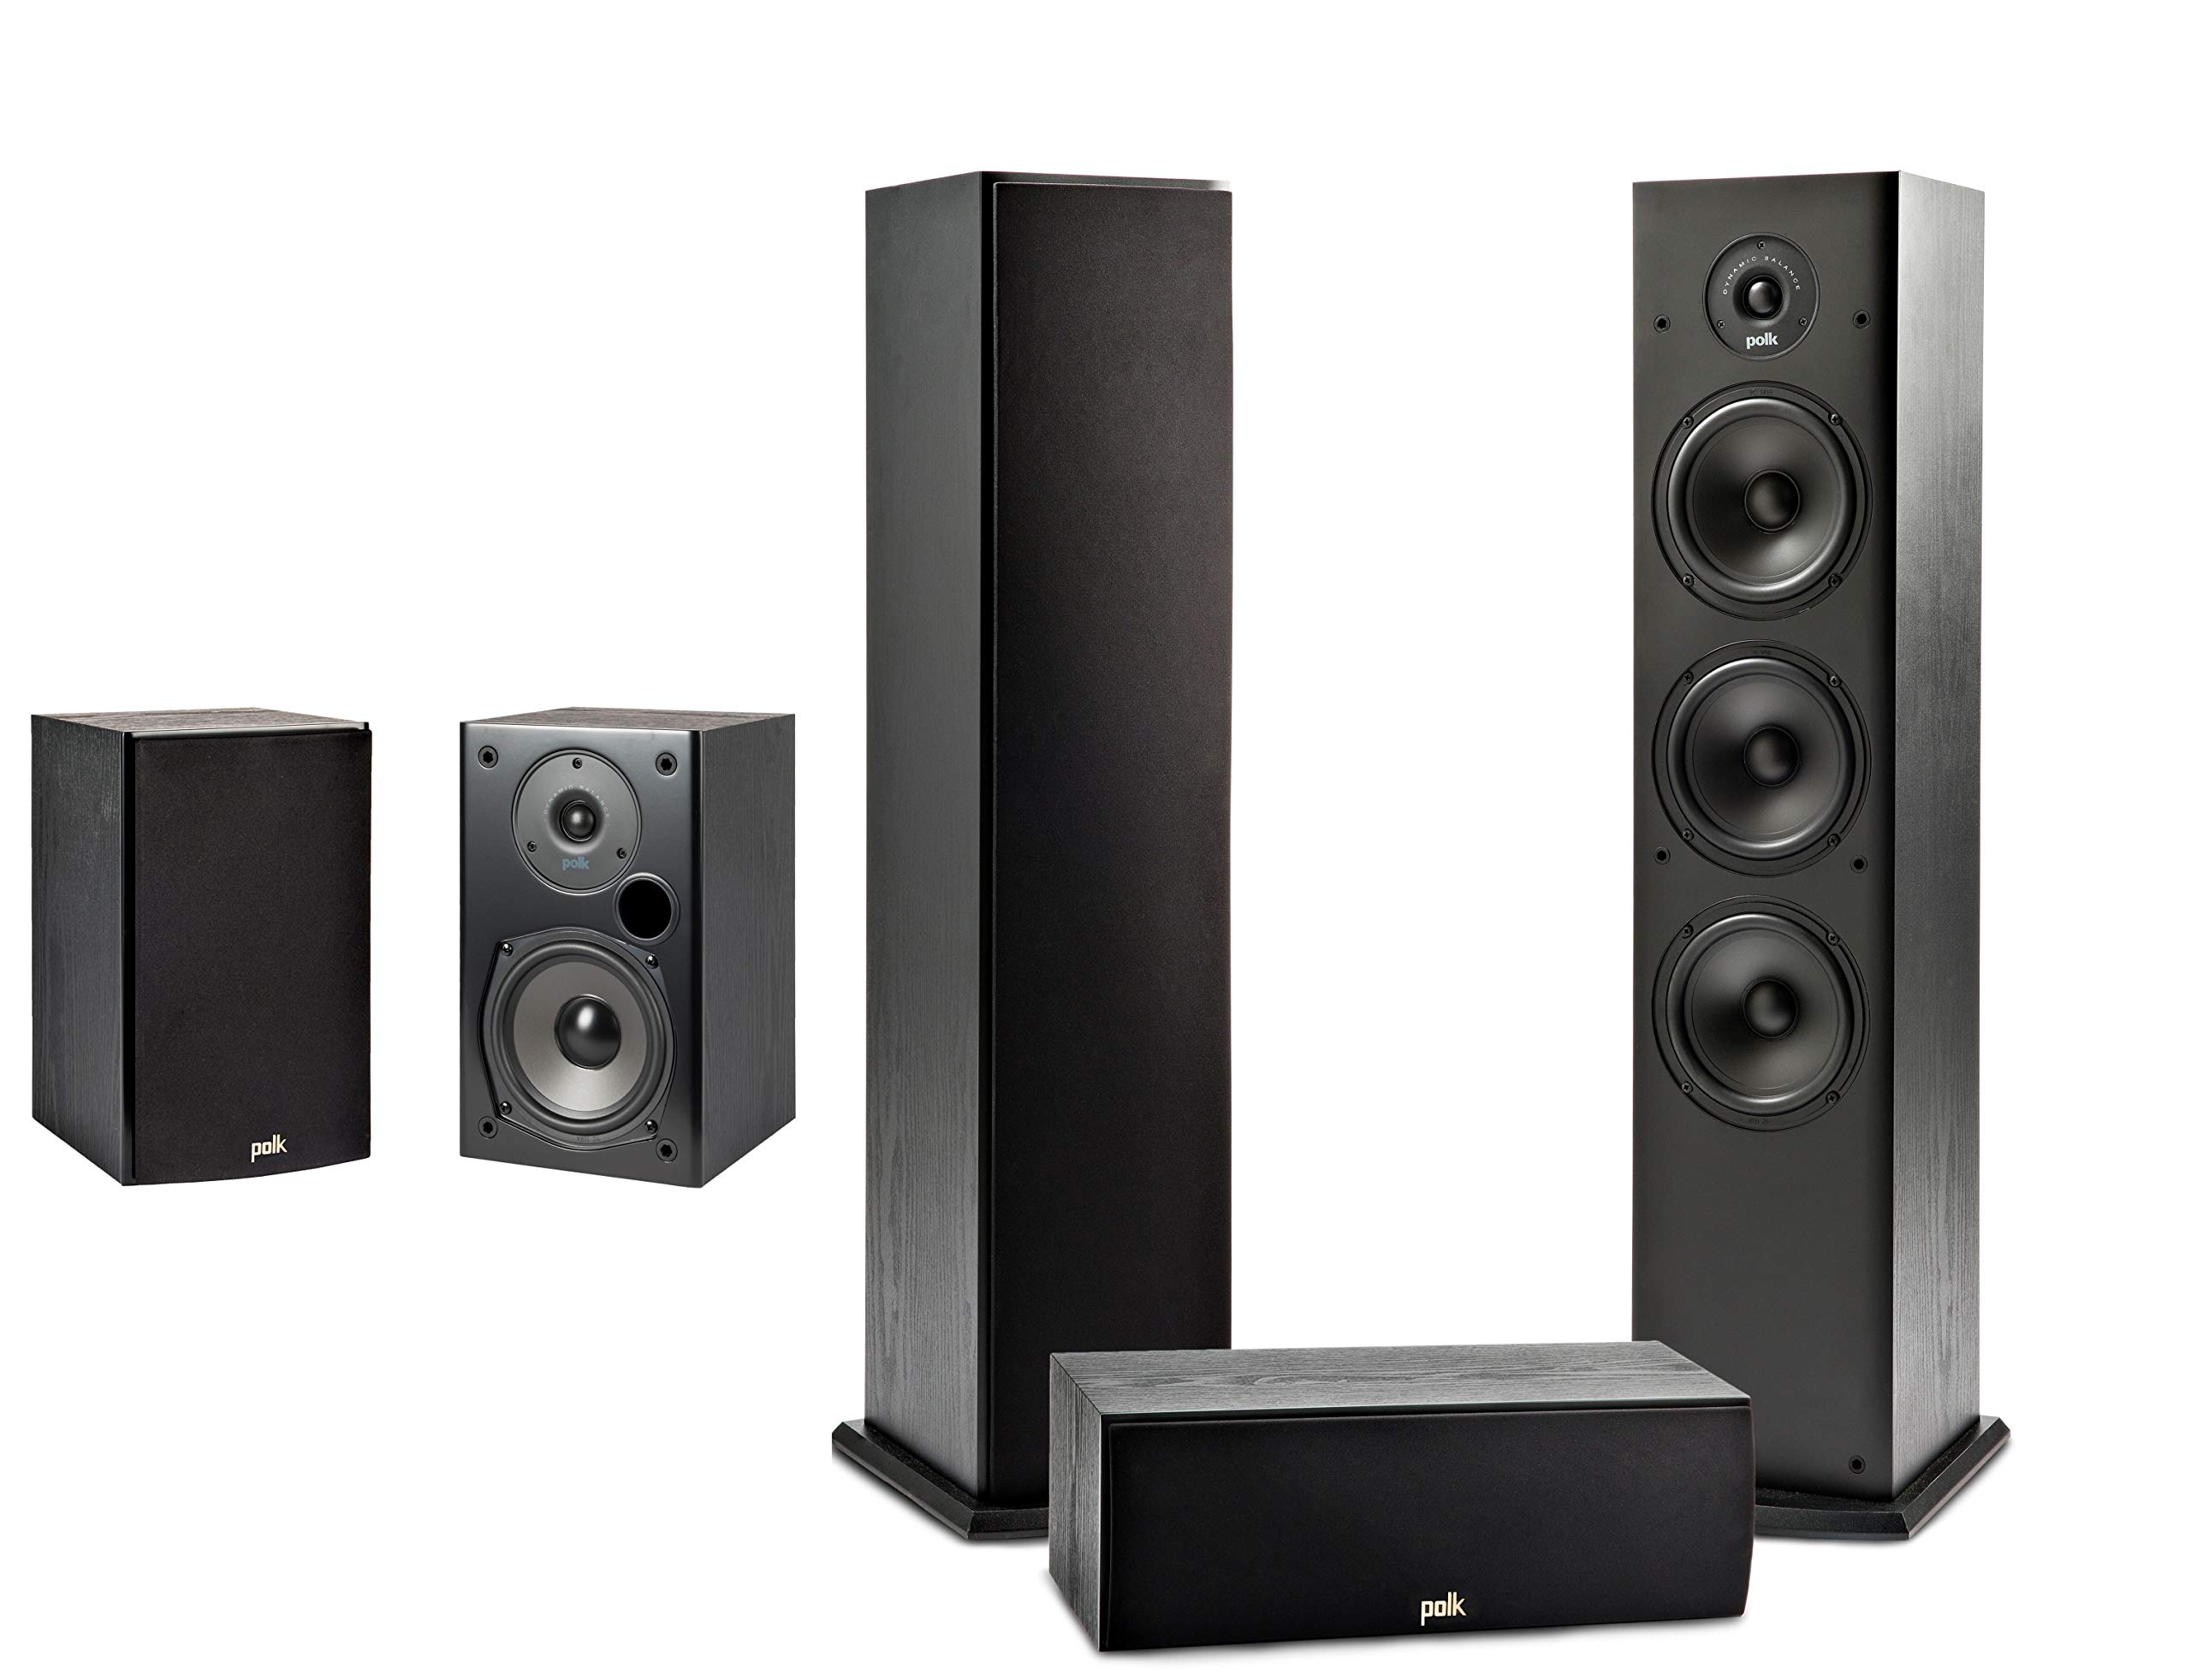 Polk Audio T Series 5 Channel Home Theater Bundle | Includes Two (2) T15 Bookshelf, One (1) T30 Center Channel & Two (2) T50 Tower Speakers | Premium Sound at a Great Value | Dolby and DTS Surround